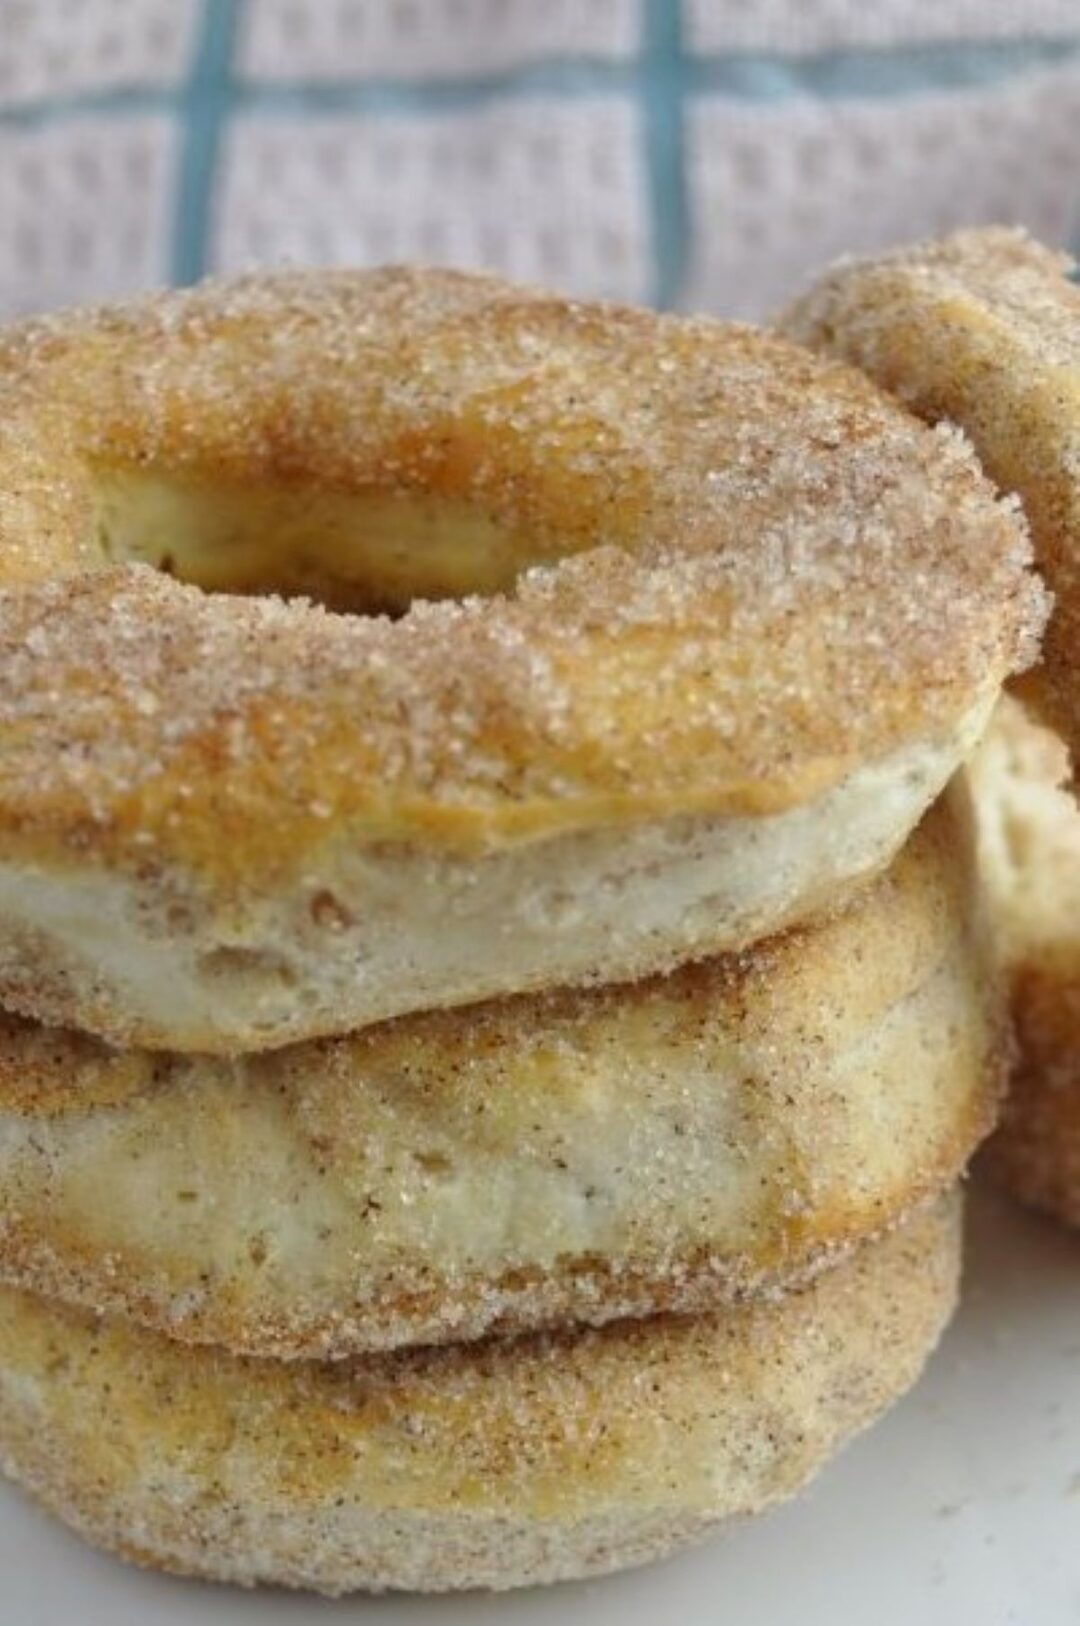 Close up picture of three delicious looking donuts made from canned biscuits in the air fryer and coated with crystal white sugar mixed with brown cinnamon. Arranged donuts are sitting on a plate stacked three high with one additional donut on the right side of the picture leaning leftwards on the stack of donuts. White cloth with blue lines forming squares is blurred in the background at the top of the picture.